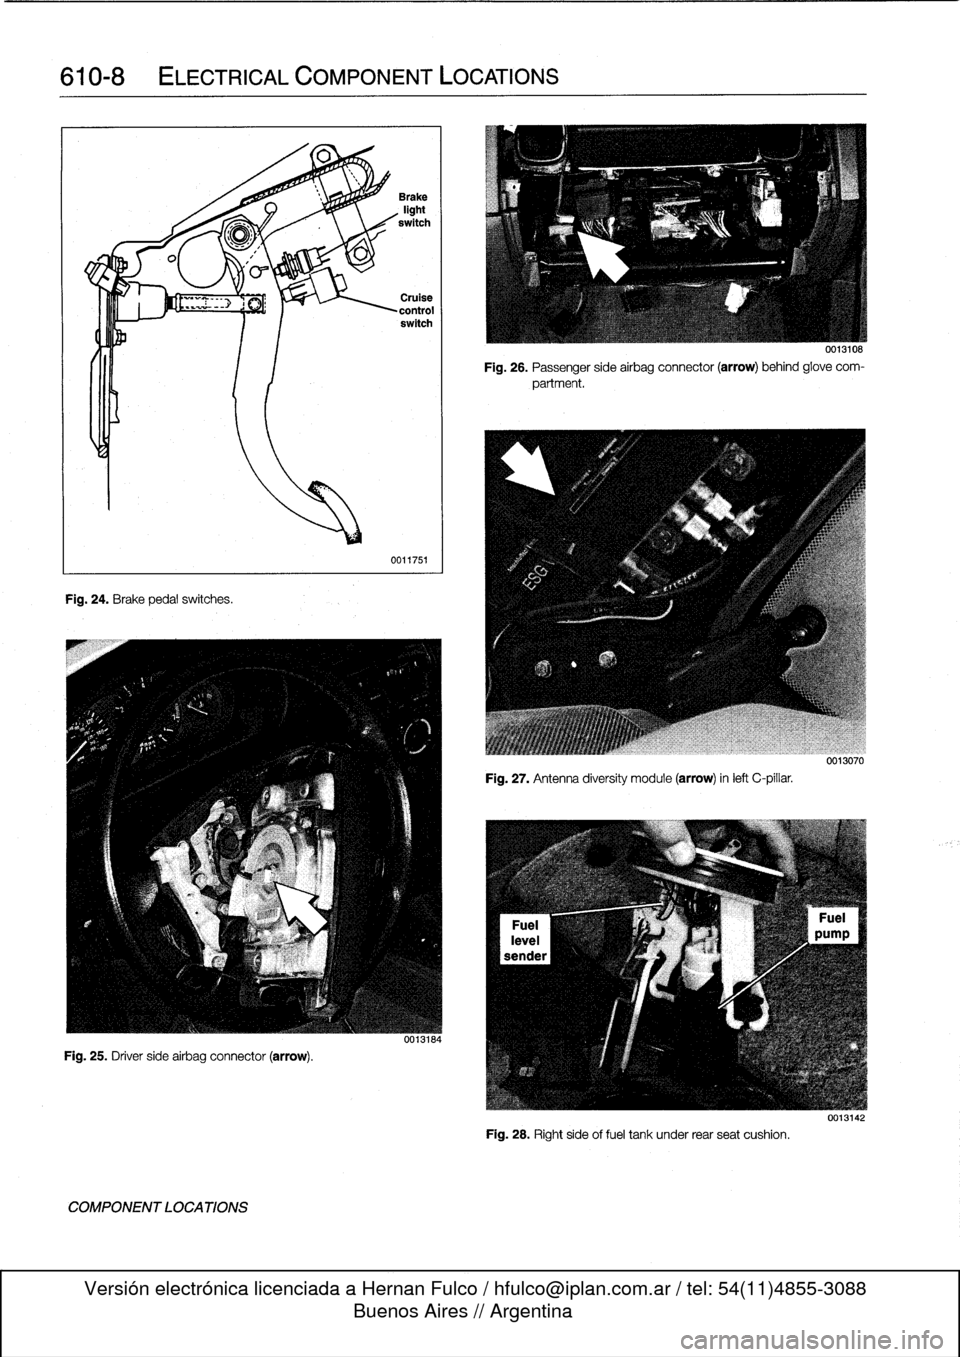 BMW 325i 1994 E36 Owners Guide 
610-$

	

ELECTRICAL
COMPONENT
LOCATIONS

Fig
.
24
.
Brake
pedalswitches
.

Fig
.
25
.
Driver
side
airbag
connector
(arrow)
.

COMPONENT
LOCATIONS

0011751

Fig
.
26
.
Passenger
sideairbag
connector
